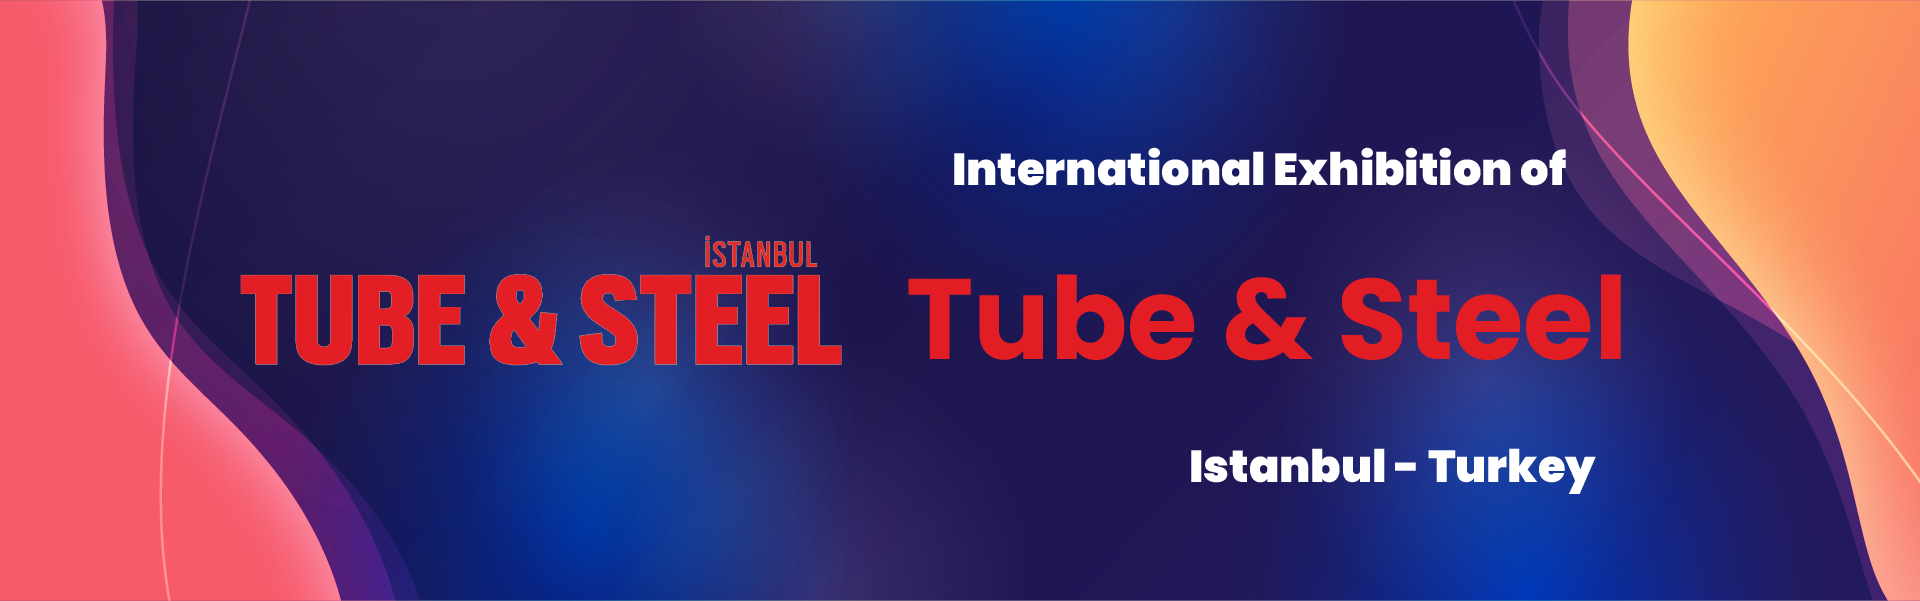 Tube and Steel Exhibition Istanbul Turkey